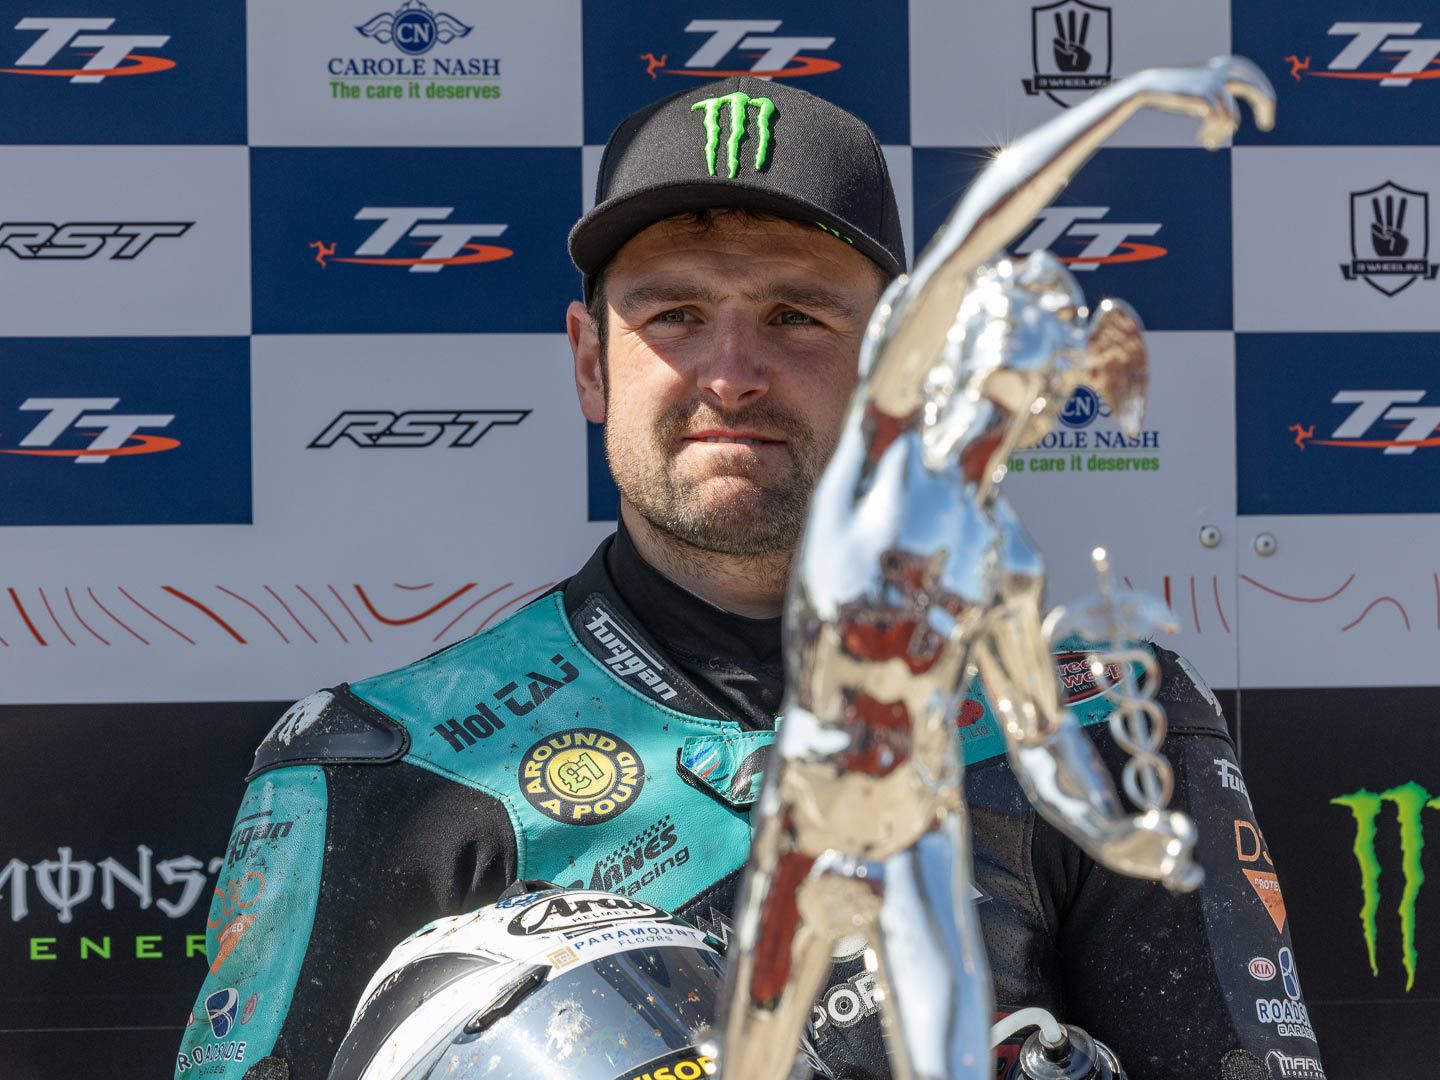 Michael Dunlop was beaming upon winning his 25th TT, moving ahead of John McGuinness as the active rider with the most wins and now only one win short of his legendary uncle, Joey Dunlop.